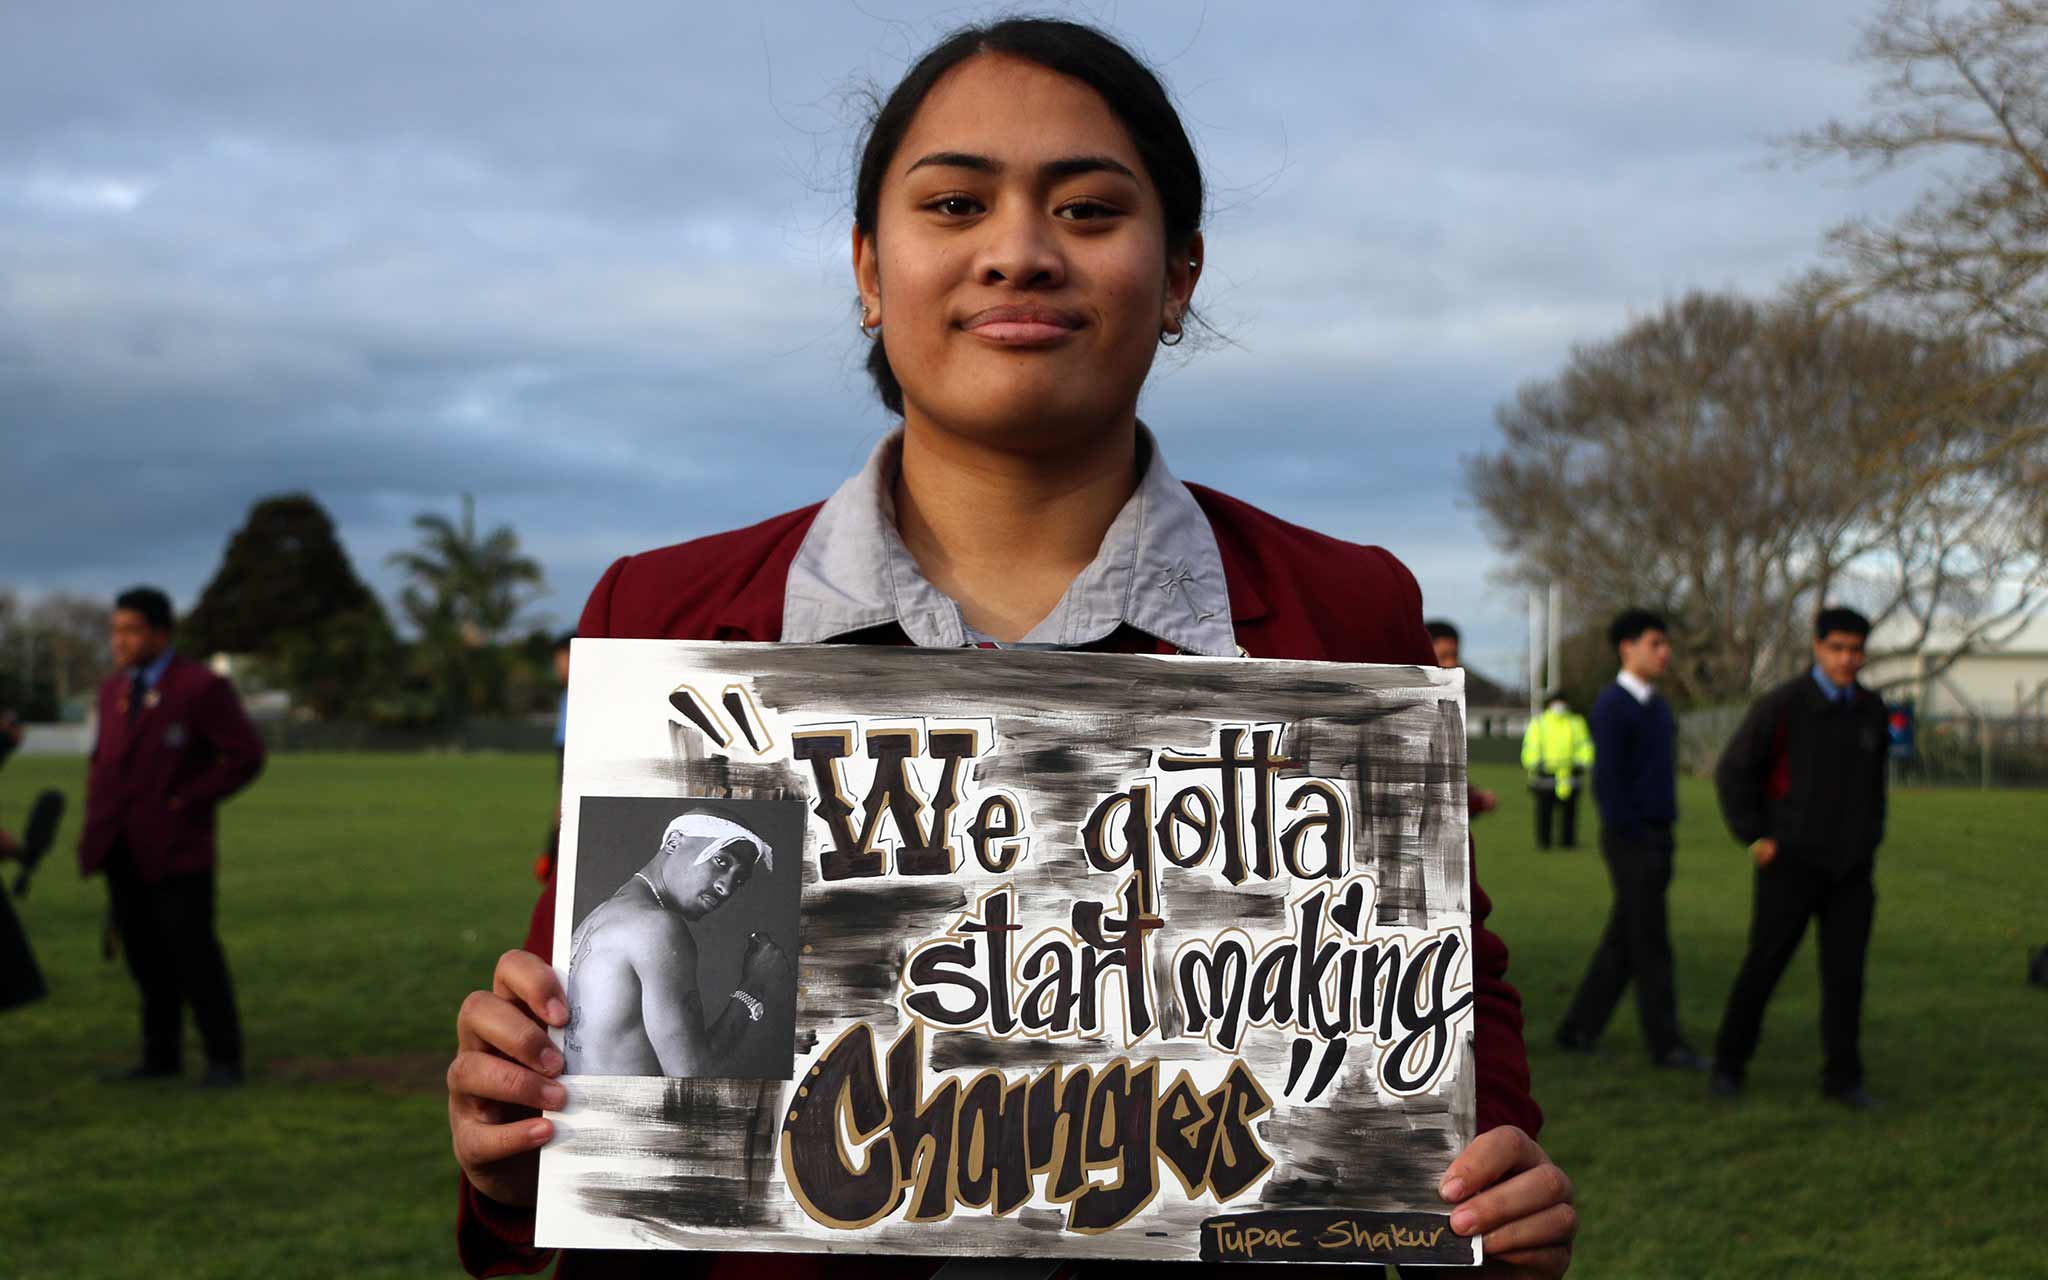 Photo of a girl holding a sign that says, "We gotta start making changes".